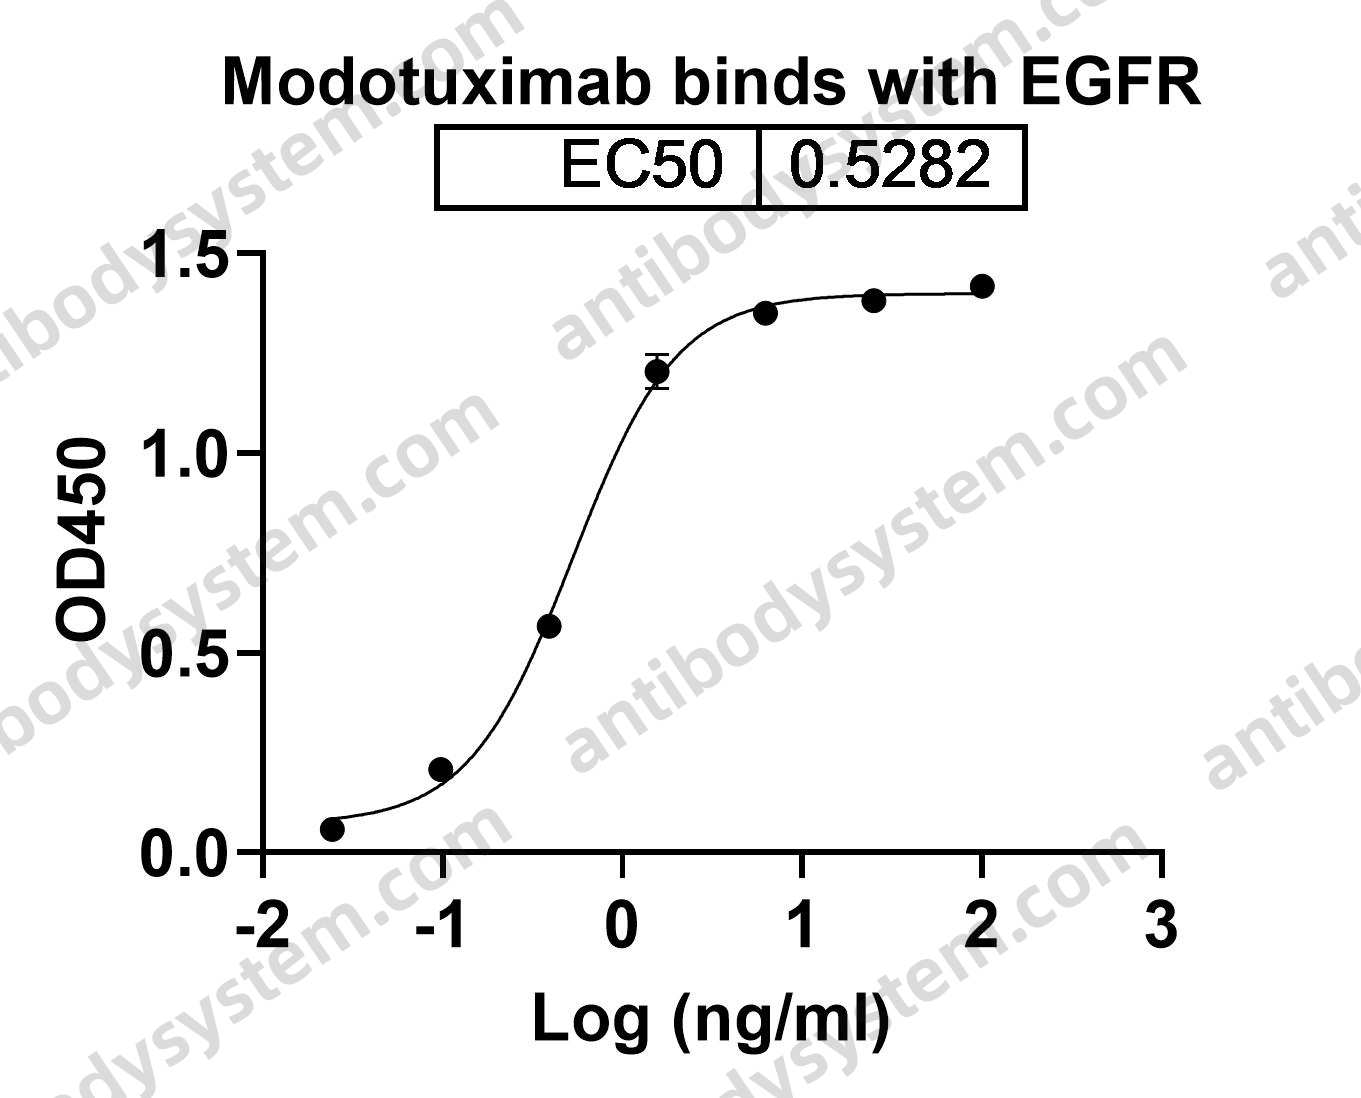 Research Grade Modotuximab